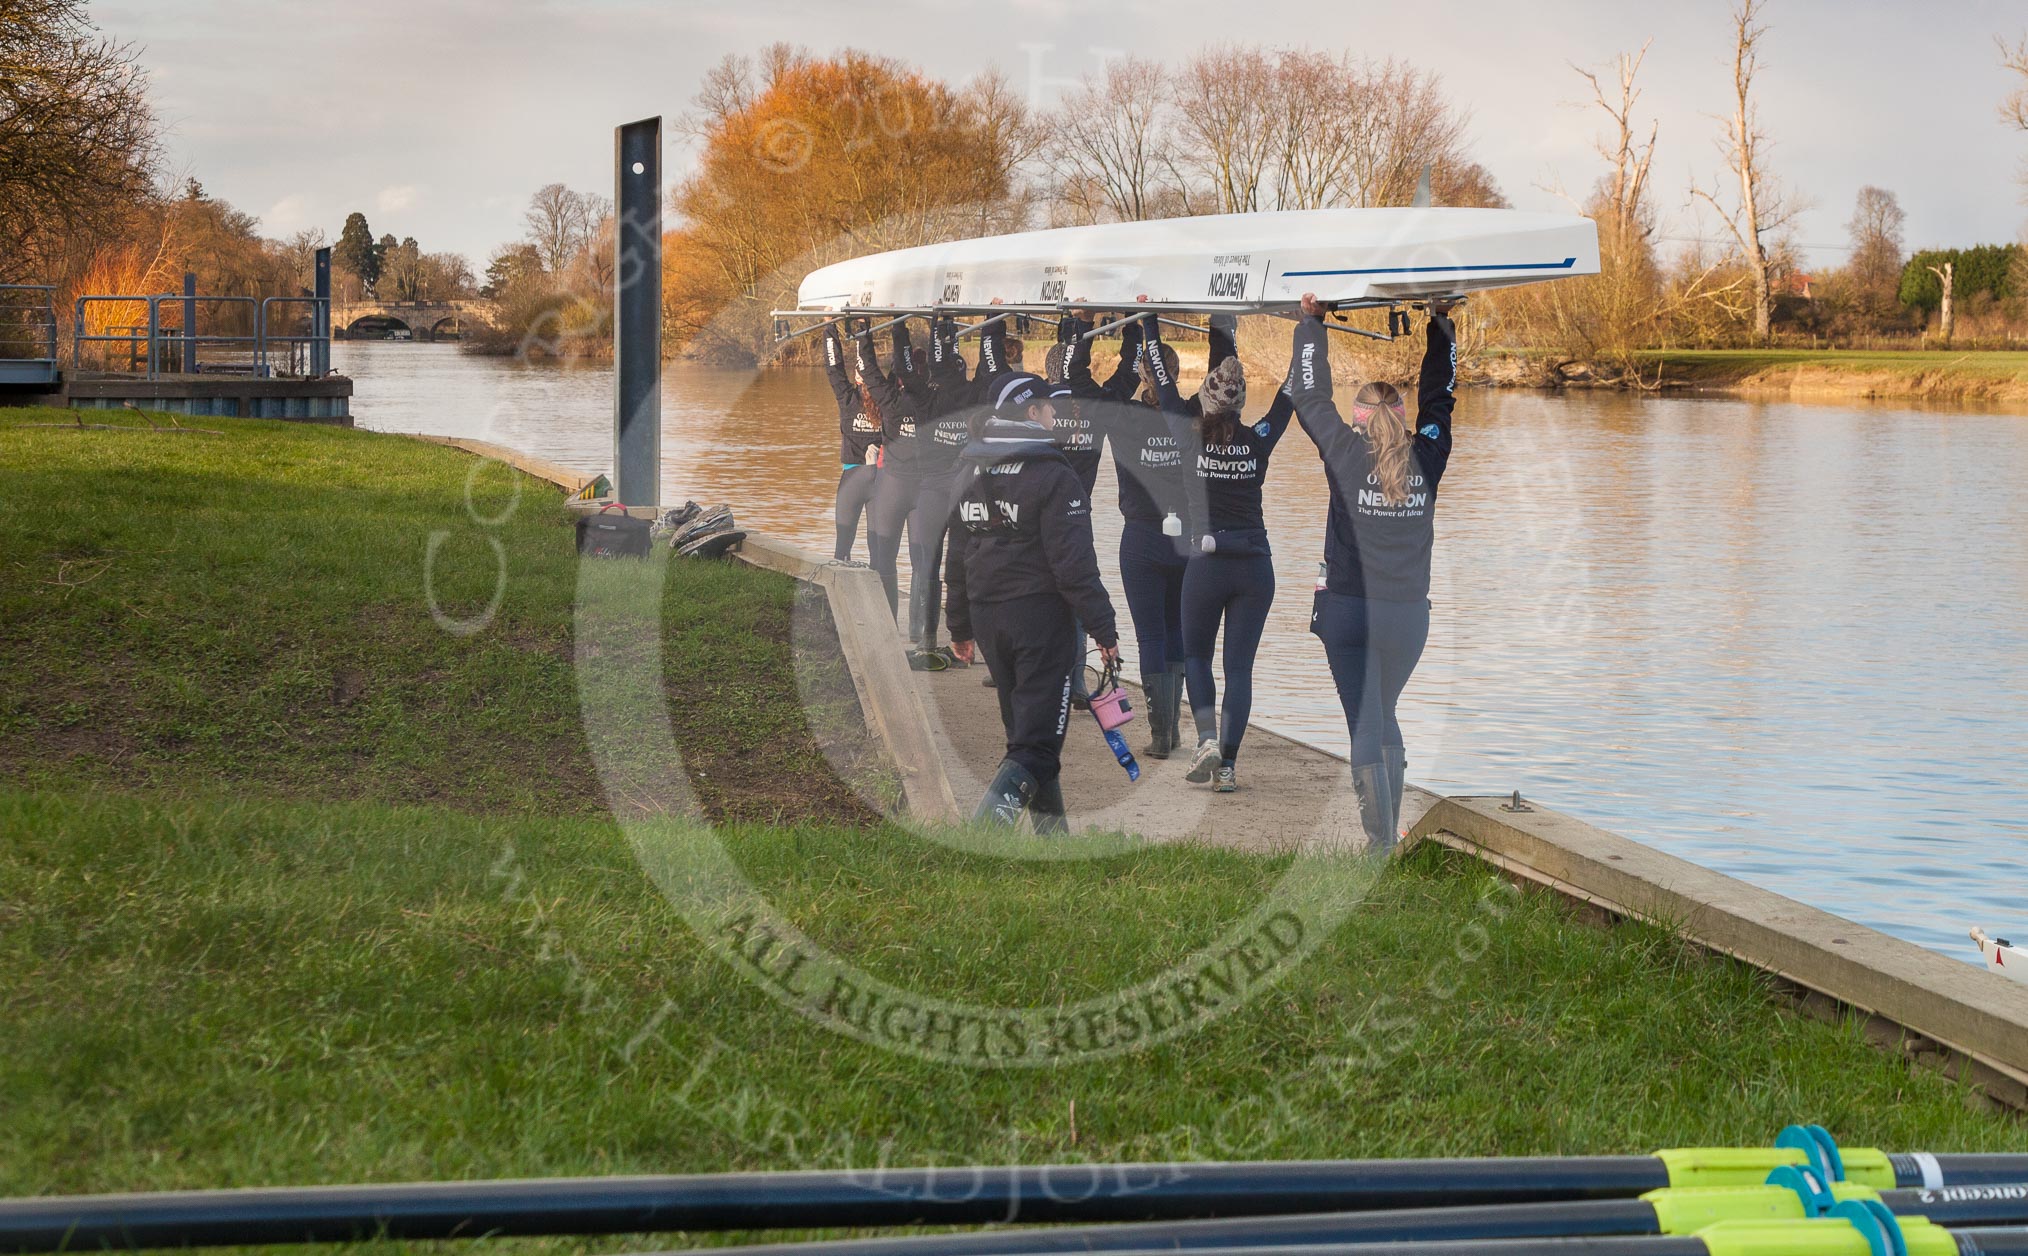 The Boat Race season 2013 - OUWBC training: The crew of the OUWBC reserve boat Osiris getting ready for training at Fleming Boathouse: bow Coralie Viollet-Djelassi, Elspeth Cumber, Hannah Ledbury, Eleanor Darlington, Rachel Purkess, Caitlin Goss, Annika Bruger, stroke Emily Chittock, and cox Sophie Shawdon..
Fleming Boathouse,
Wallingford,
Oxfordshire,
United Kingdom,
on 13 March 2013 at 16:50, image #22